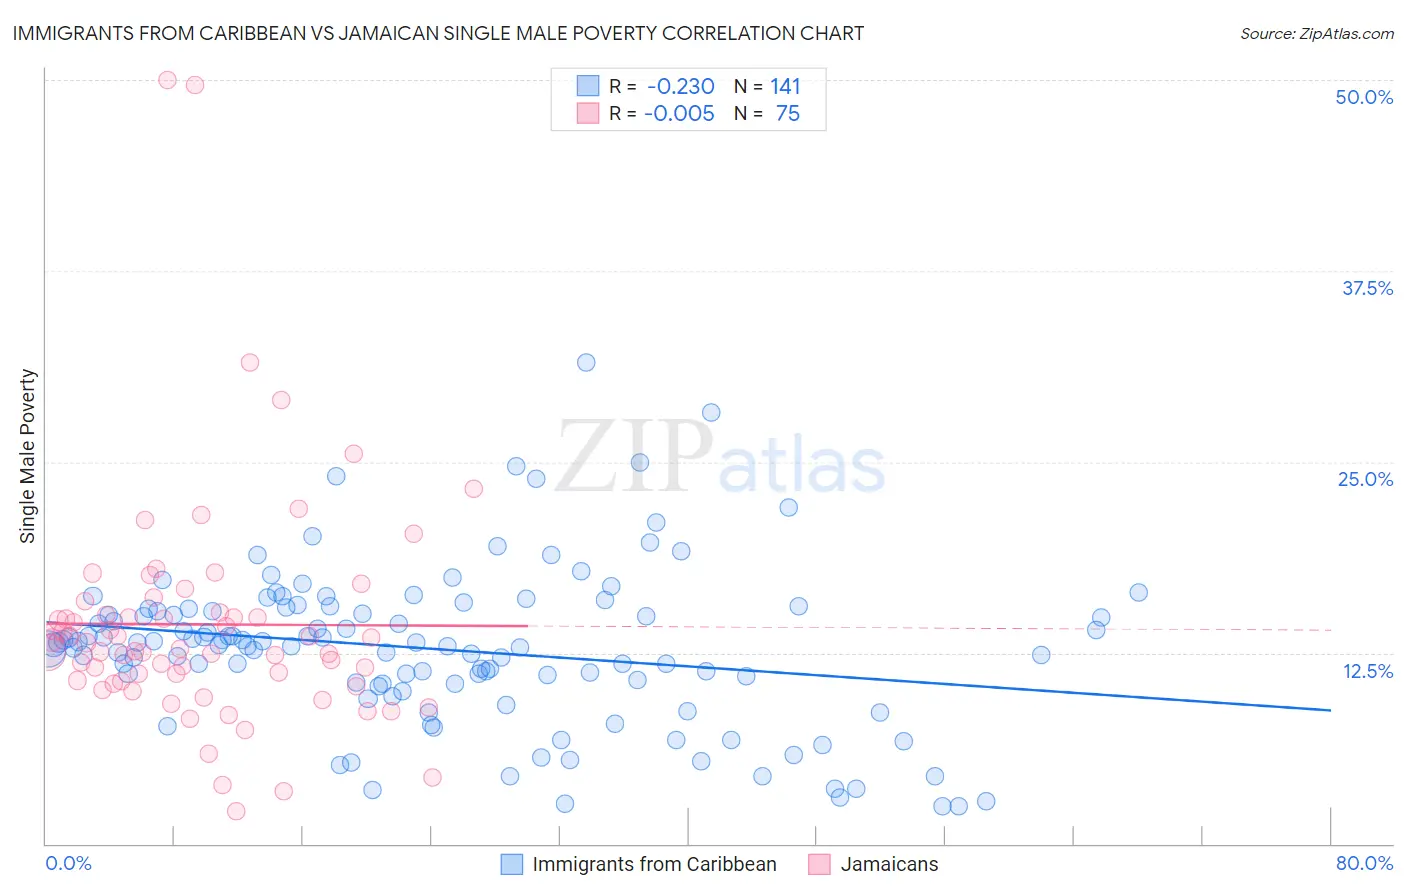 Immigrants from Caribbean vs Jamaican Single Male Poverty